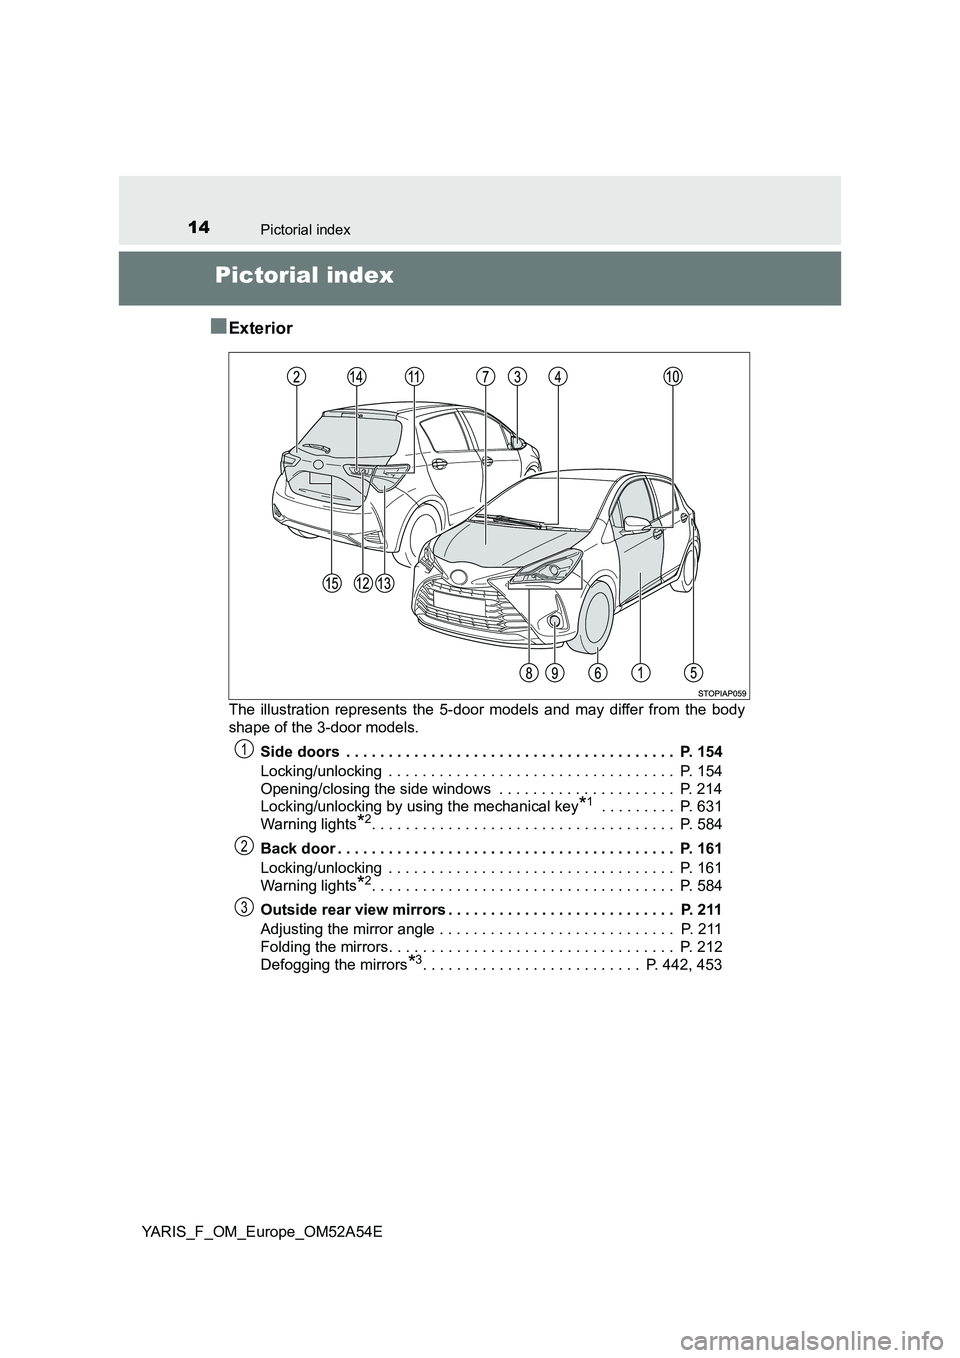 TOYOTA YARIS 2020  Owners Manual 14Pictorial index
YARIS_F_OM_Europe_OM52A54E
Pictorial index 
■Exterior
The illustration represent s the 5-door models and may differ from the body 
shape of the 3-door models.  
Side doors  . . . .